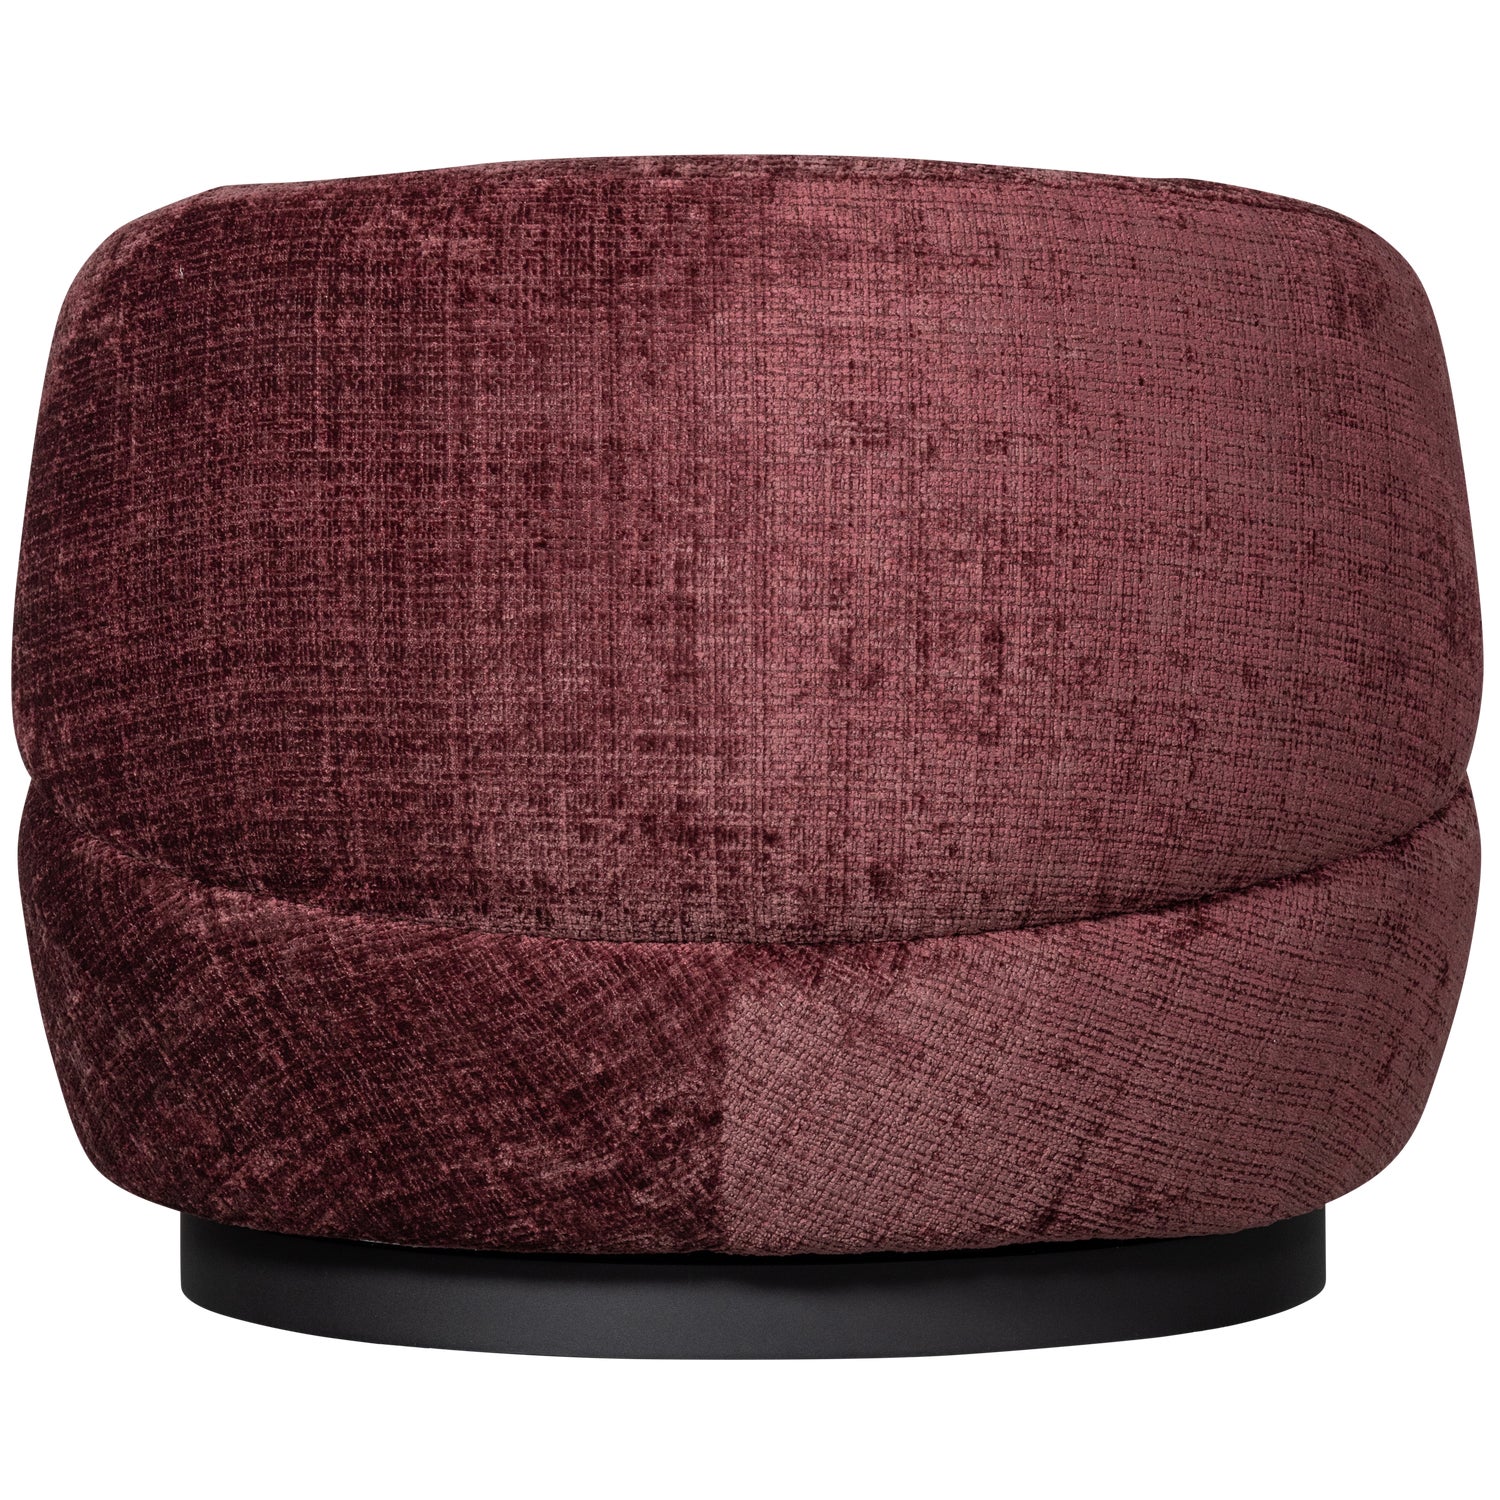 800037-A-04_VS_FA_Woolly_draaifauteuil_chenille_aubergine_AK1.png?auto=webp&format=png&width=1500&height=1500